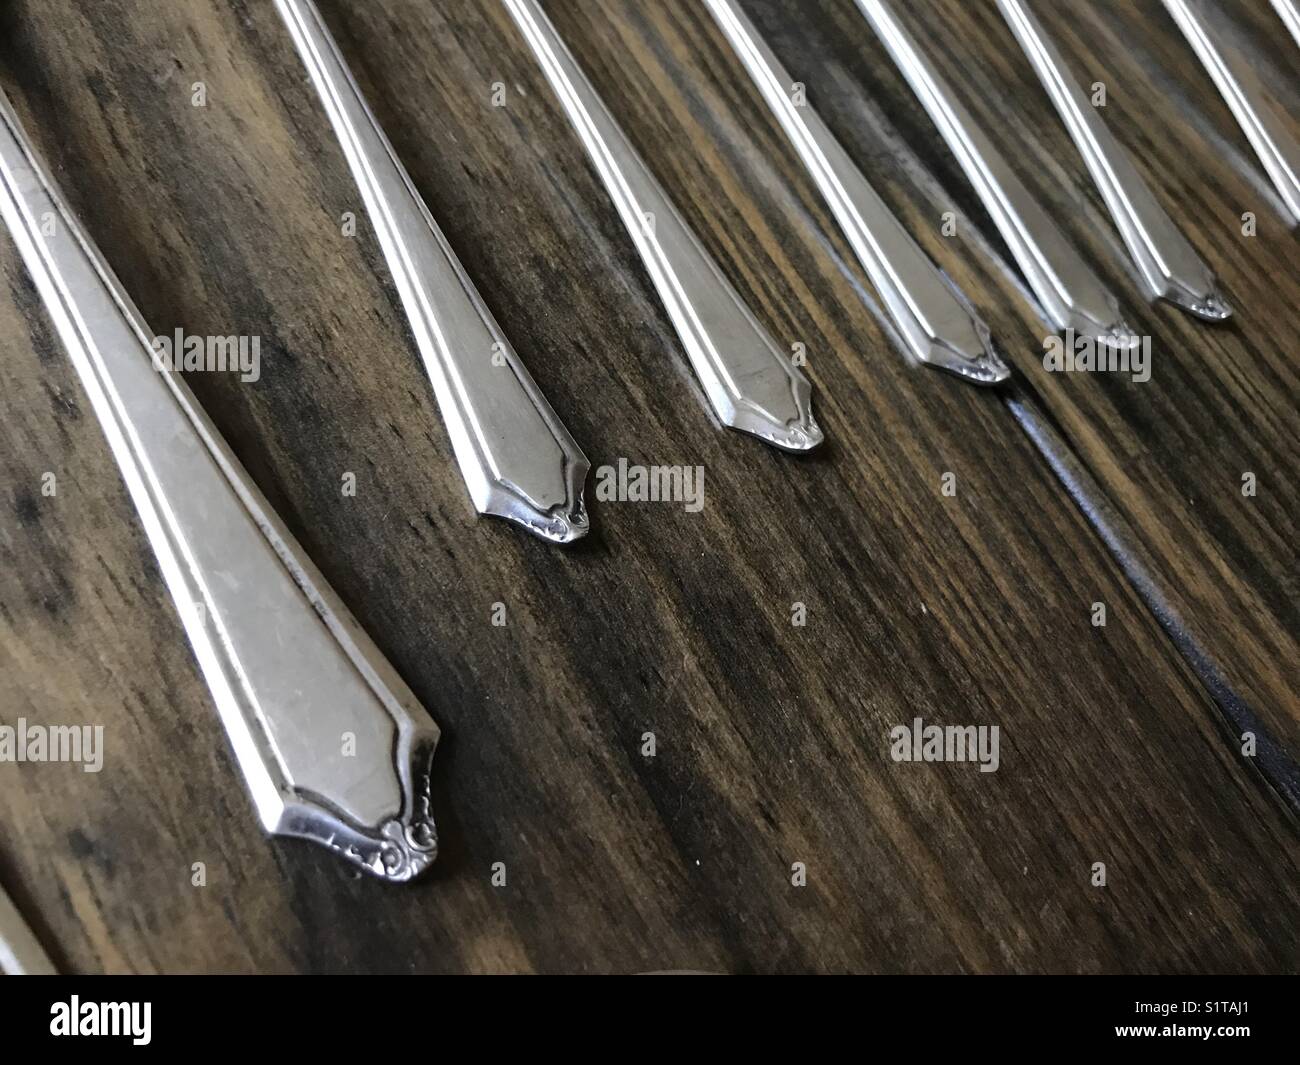 Sterling Silver Flatware Handle Stock Photo